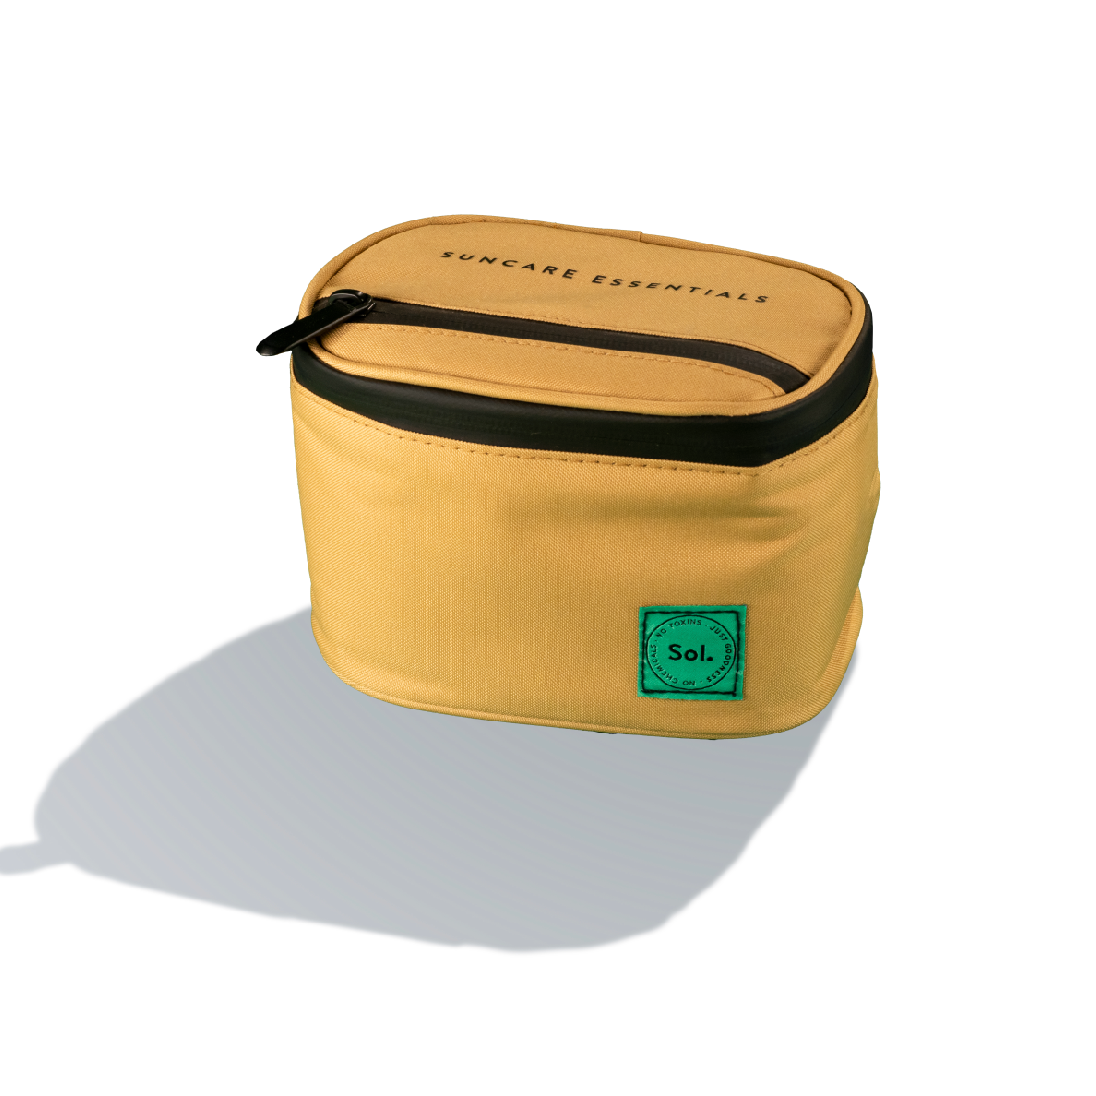 Our perfect compact size insulated bag, is a great companion to store your sunscreen and some extra goodies into one water resistant bag. A top zip pocket perfect for your keys.